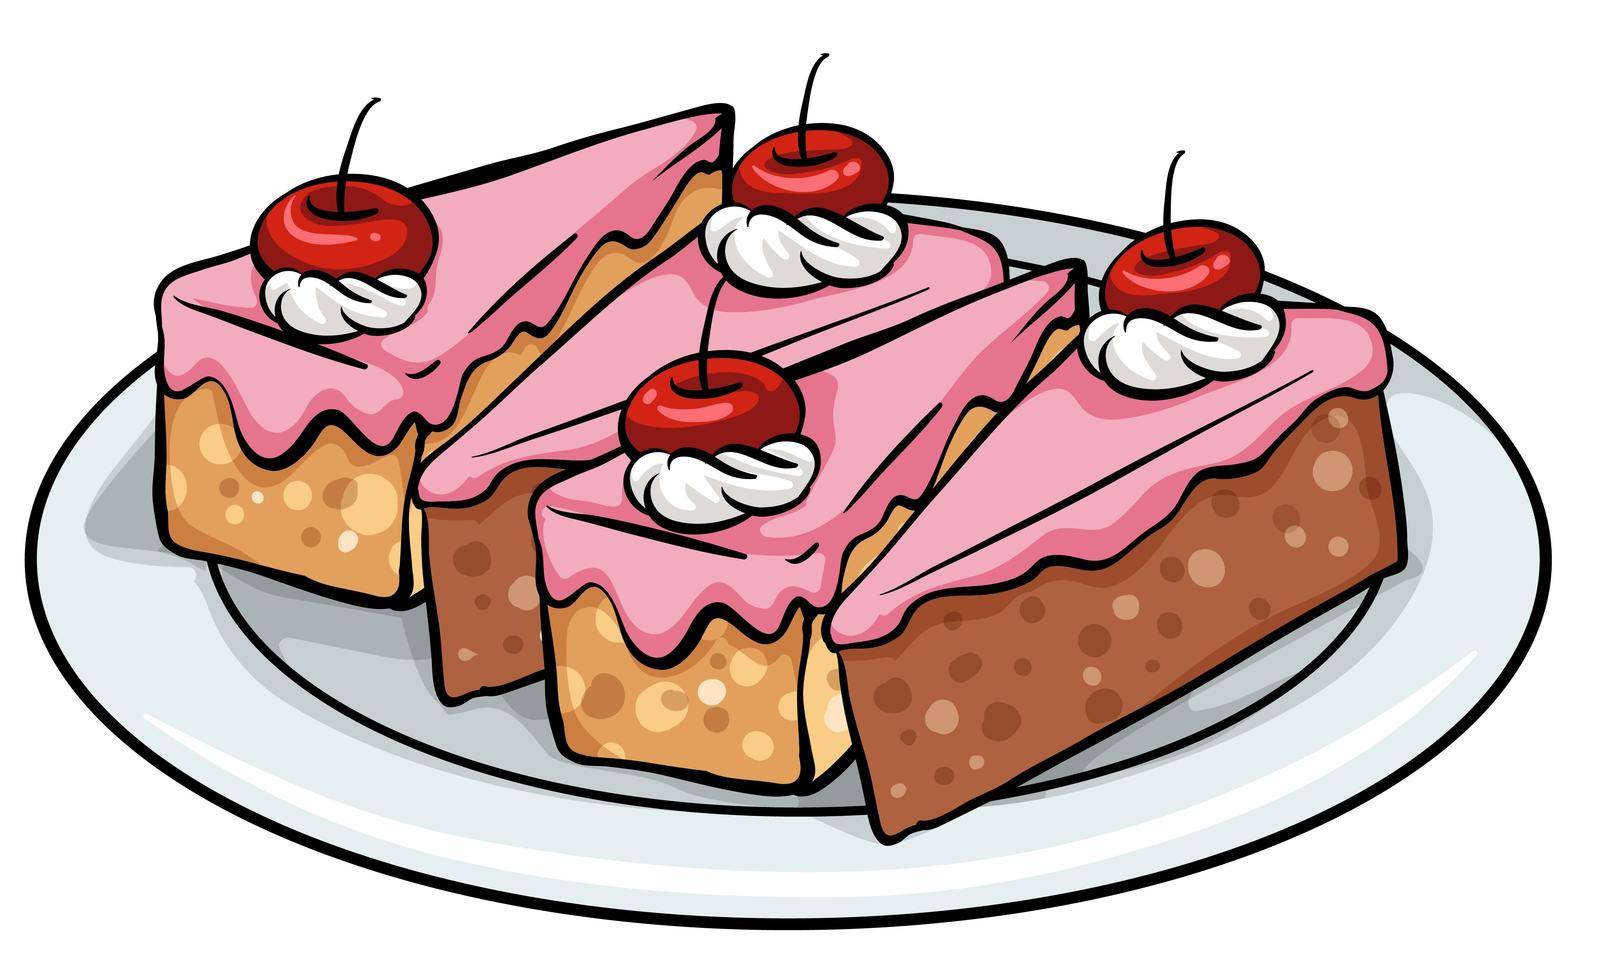 Plate of sliced cakes on a white background